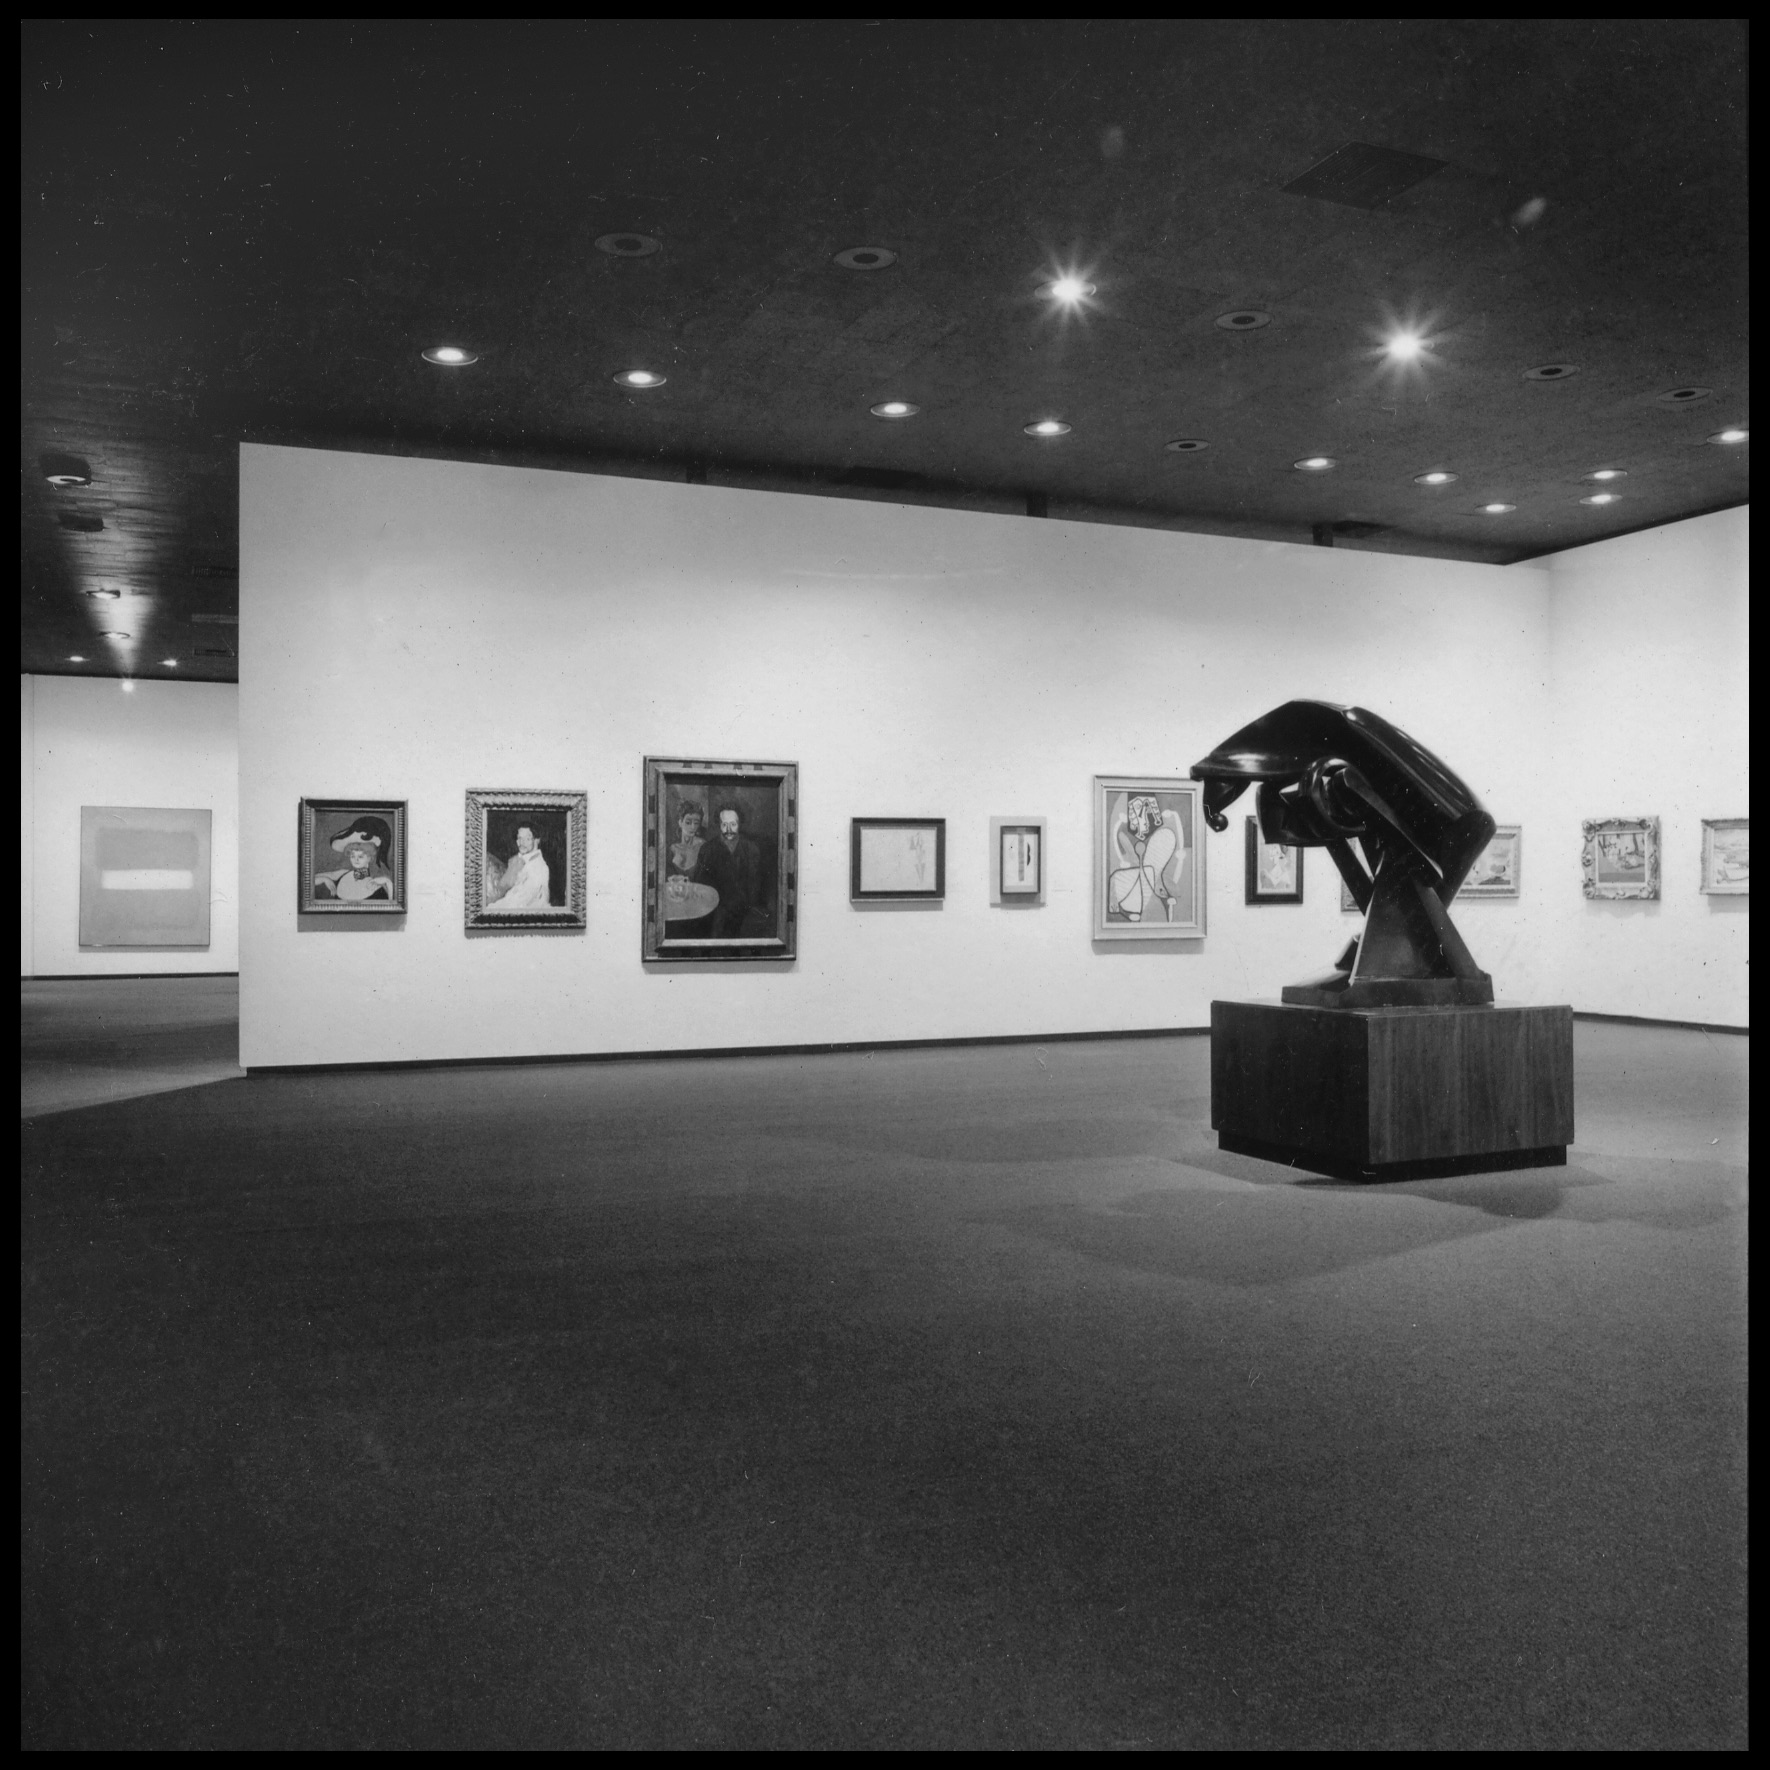 Black and white photograph of gallery with paintings and a sculpture